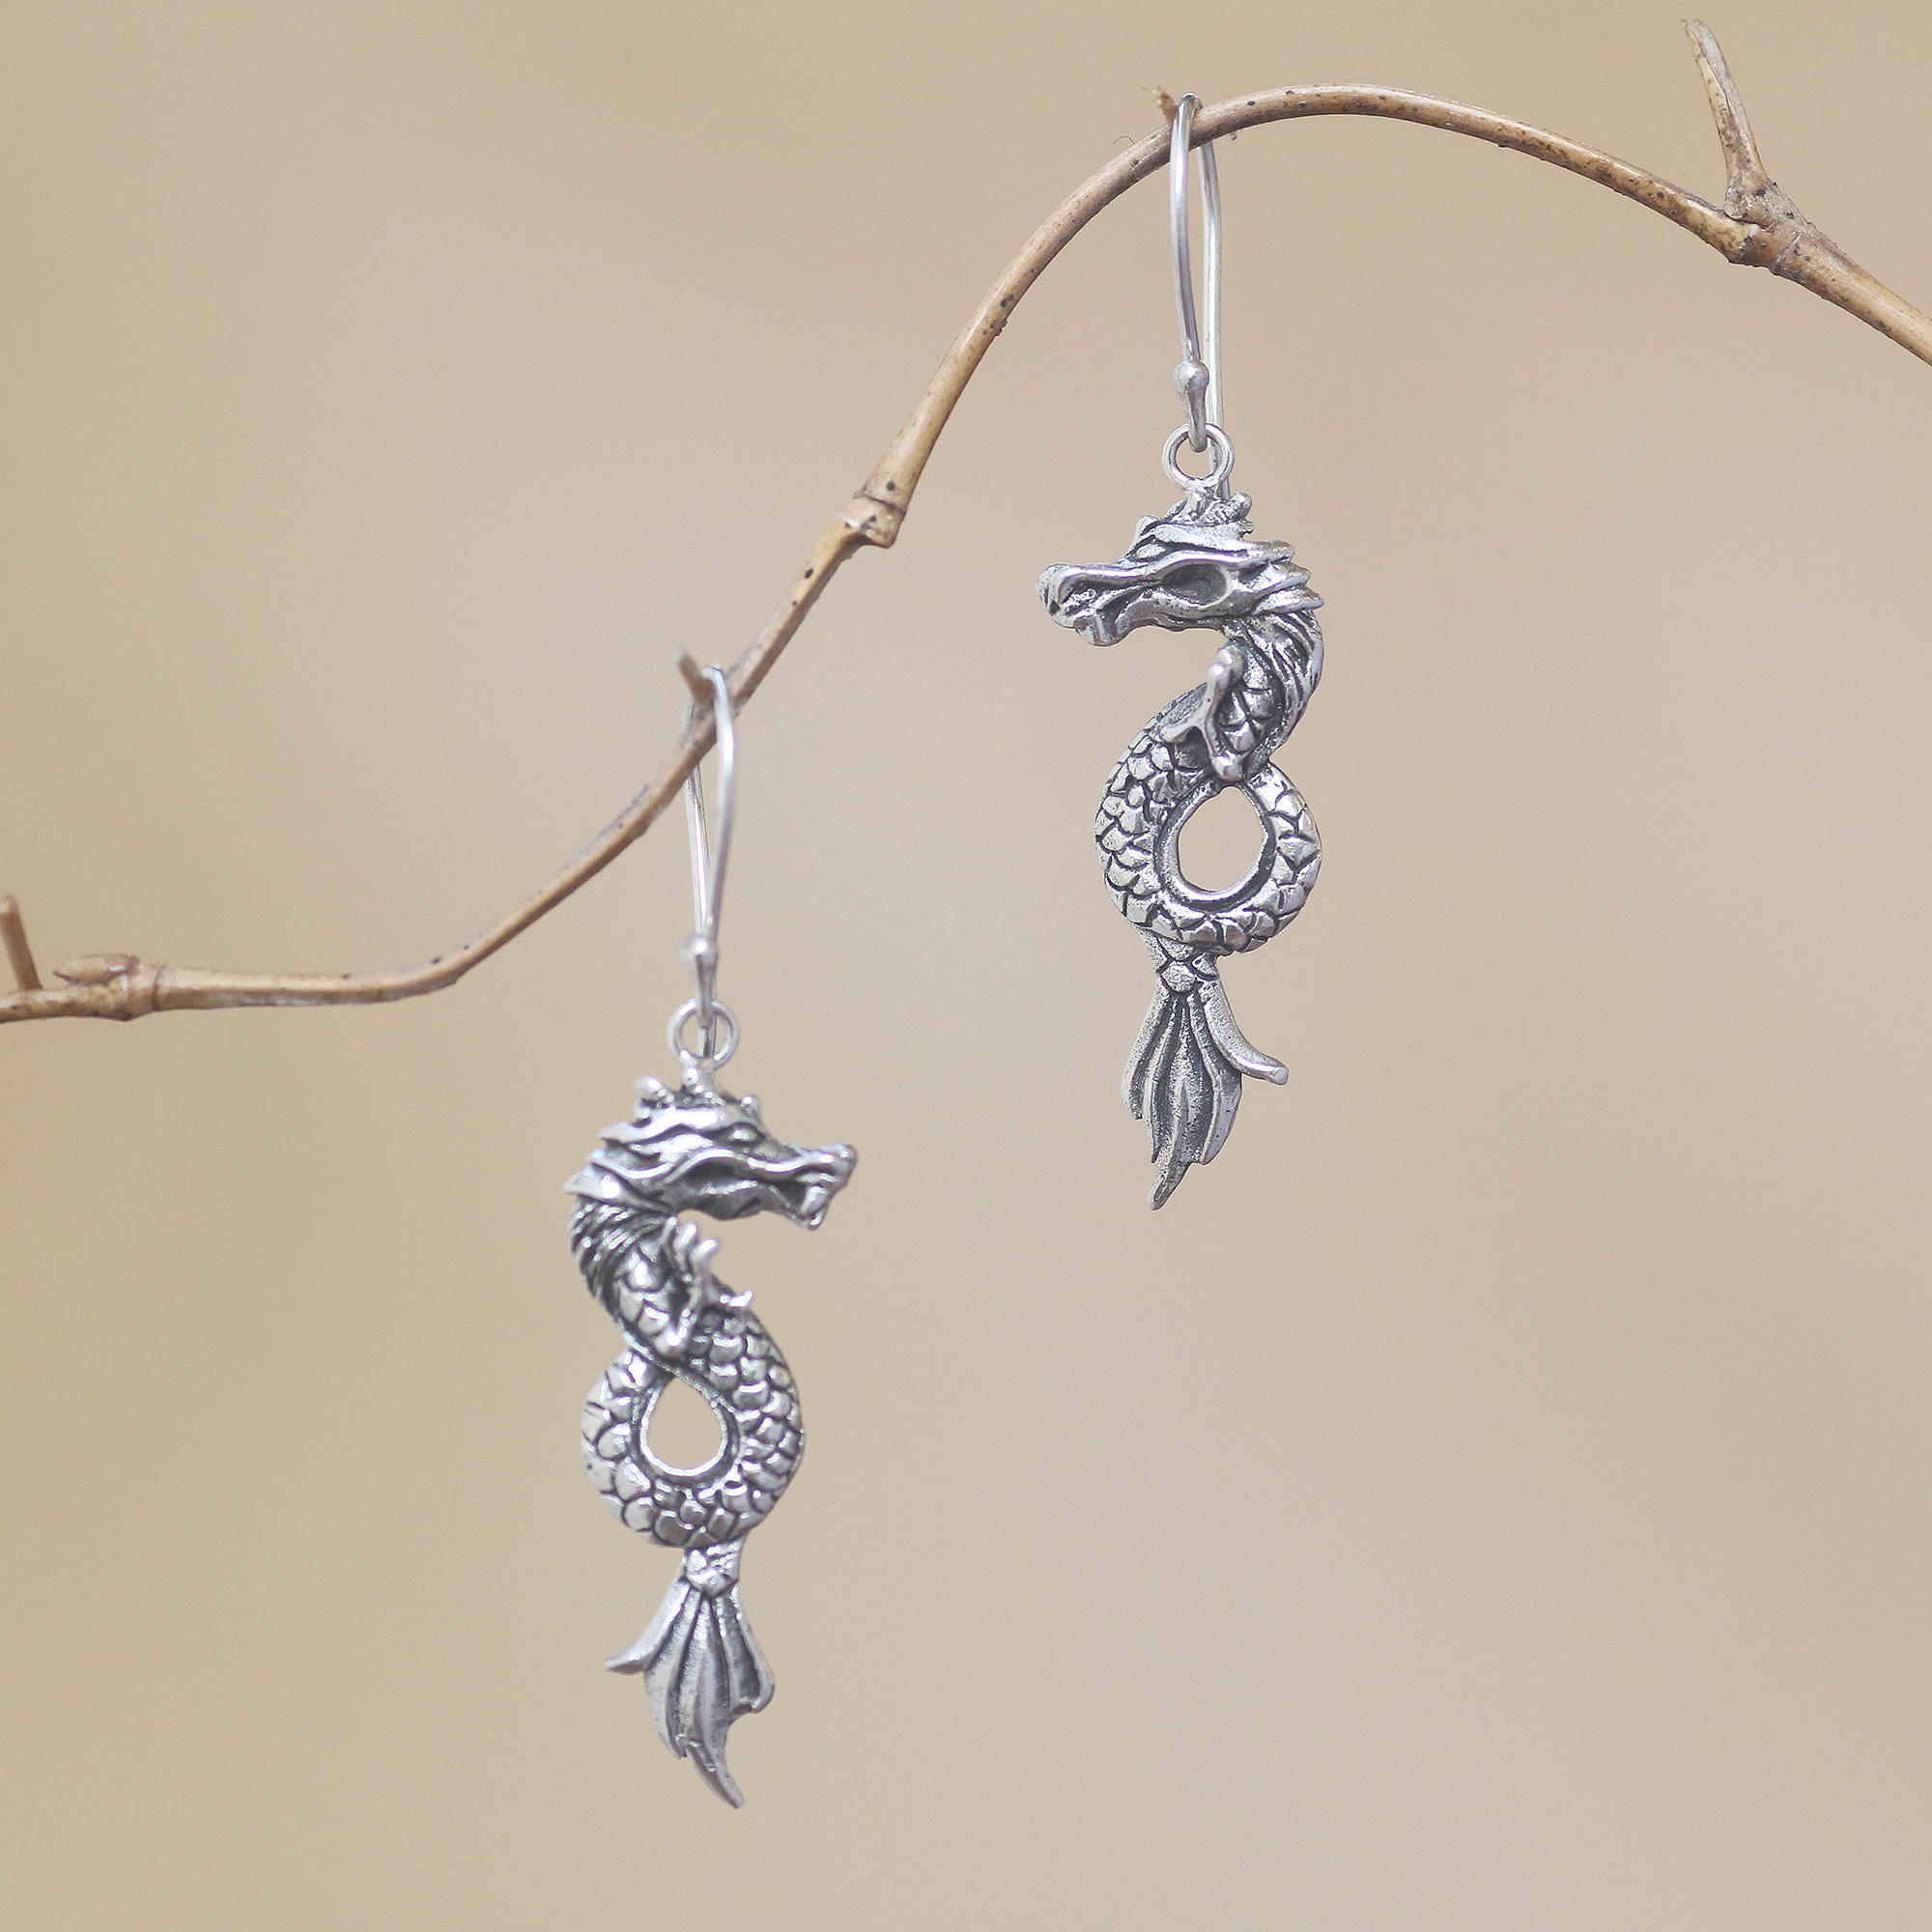 Handcrafted Sterling Silver Dragon Dangle Earrings - Dramatic Dragons ...